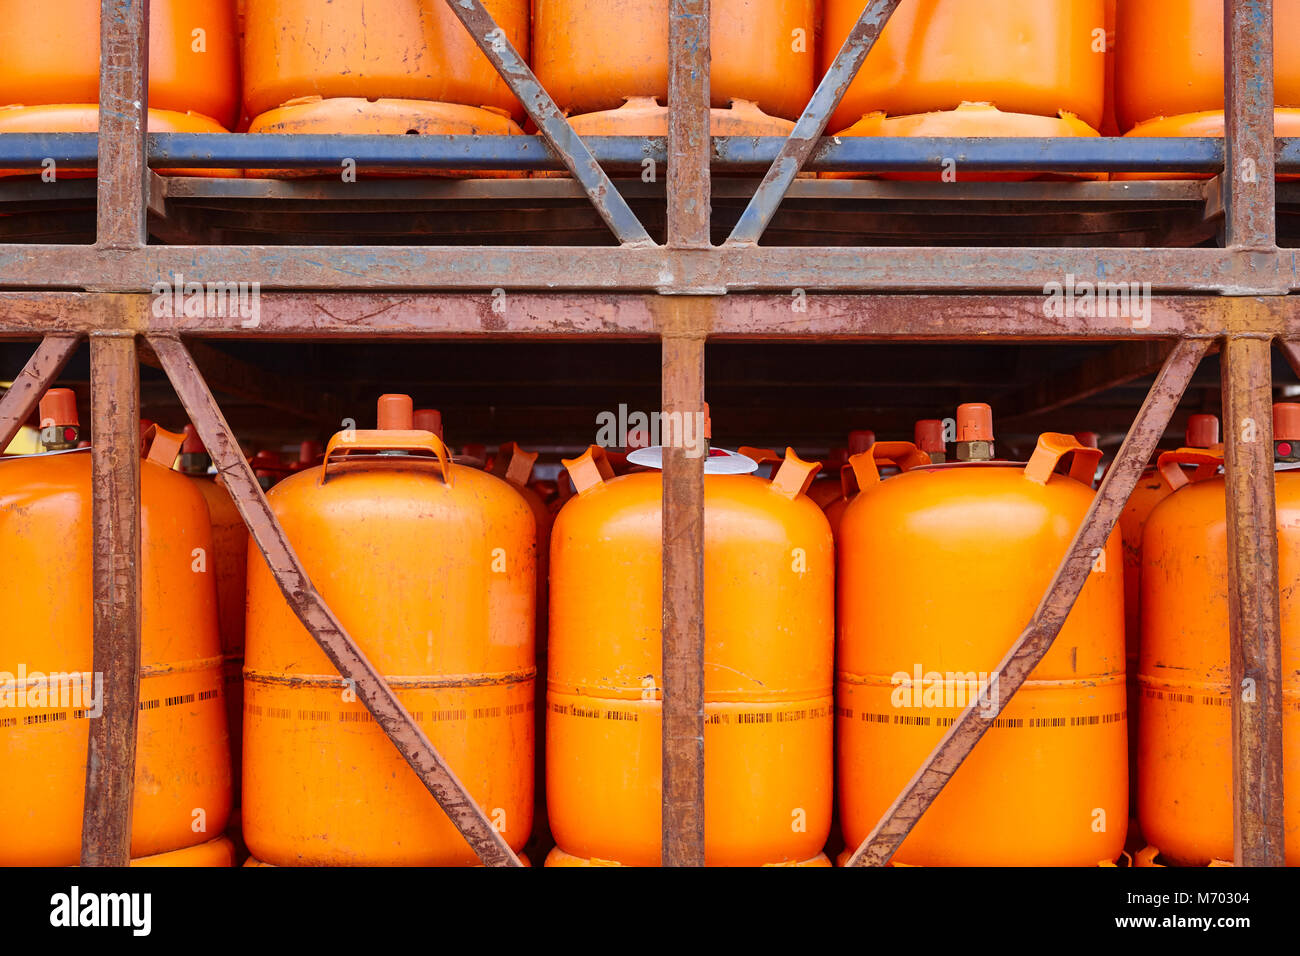 Used gas butane cylinder containers in orange tone. Horizontal Stock Photo